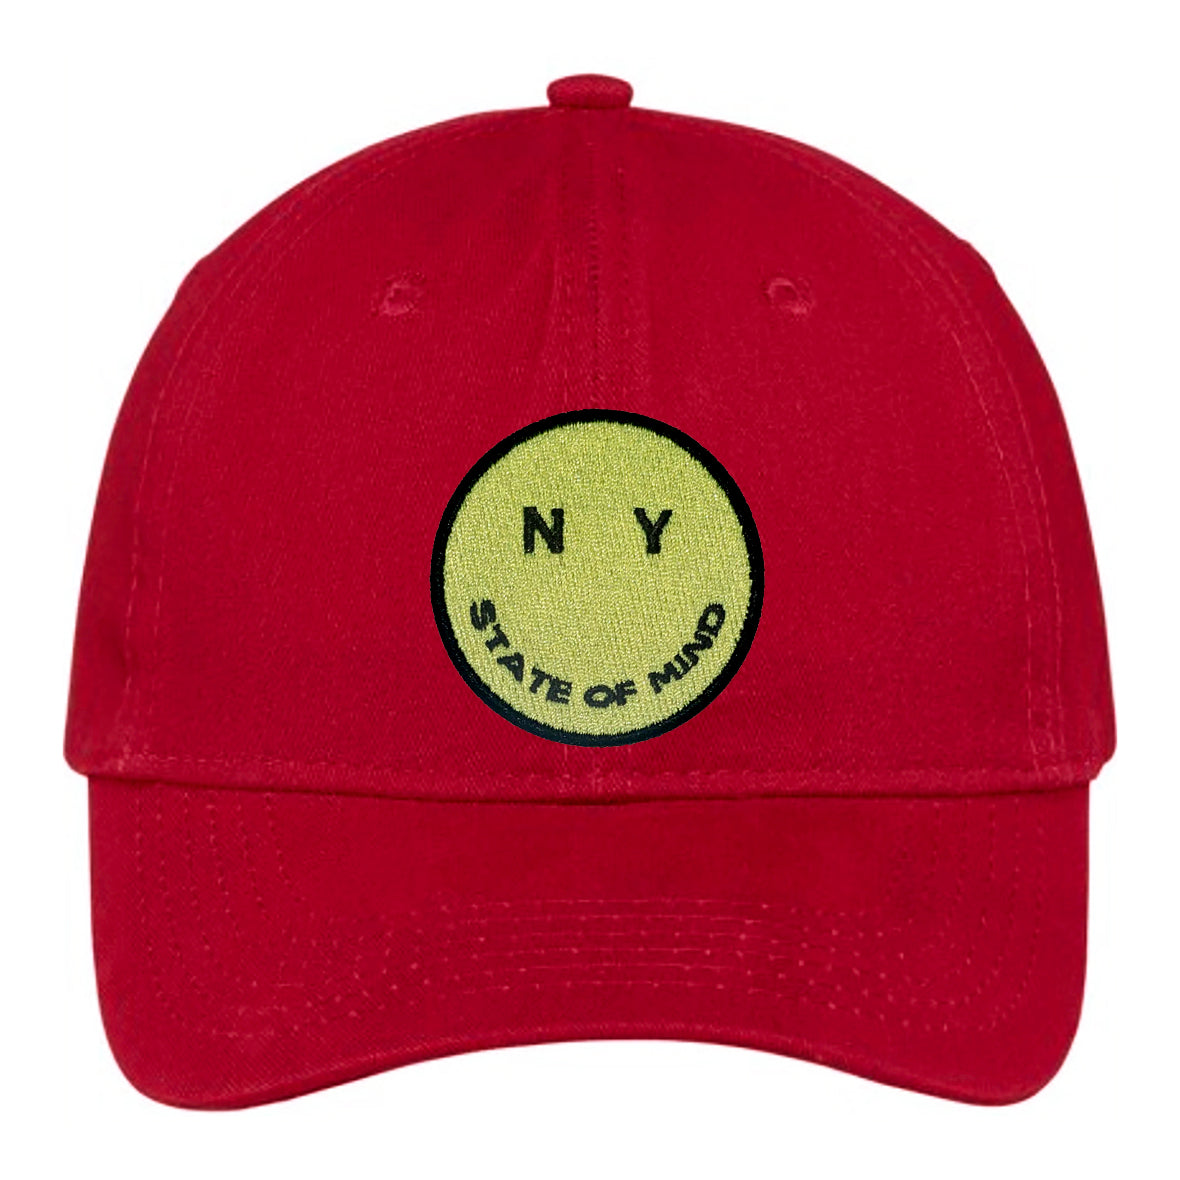 Have A NYC Day Dad Hat